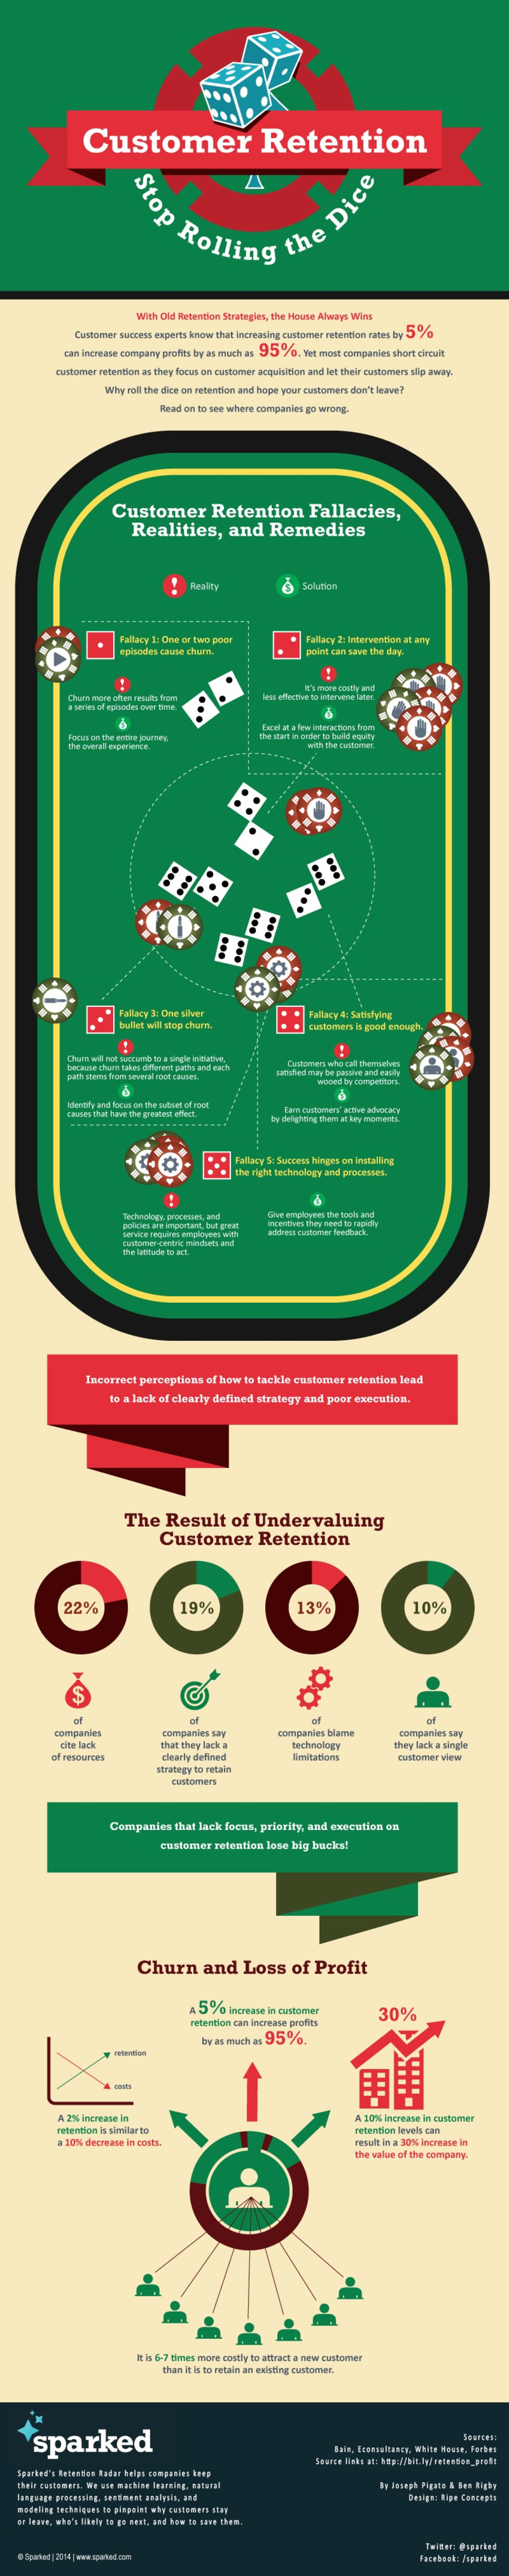 Stop Gambling With Customer Retention [Infographic] - Profs | The MarTech Digest | Scoop.it